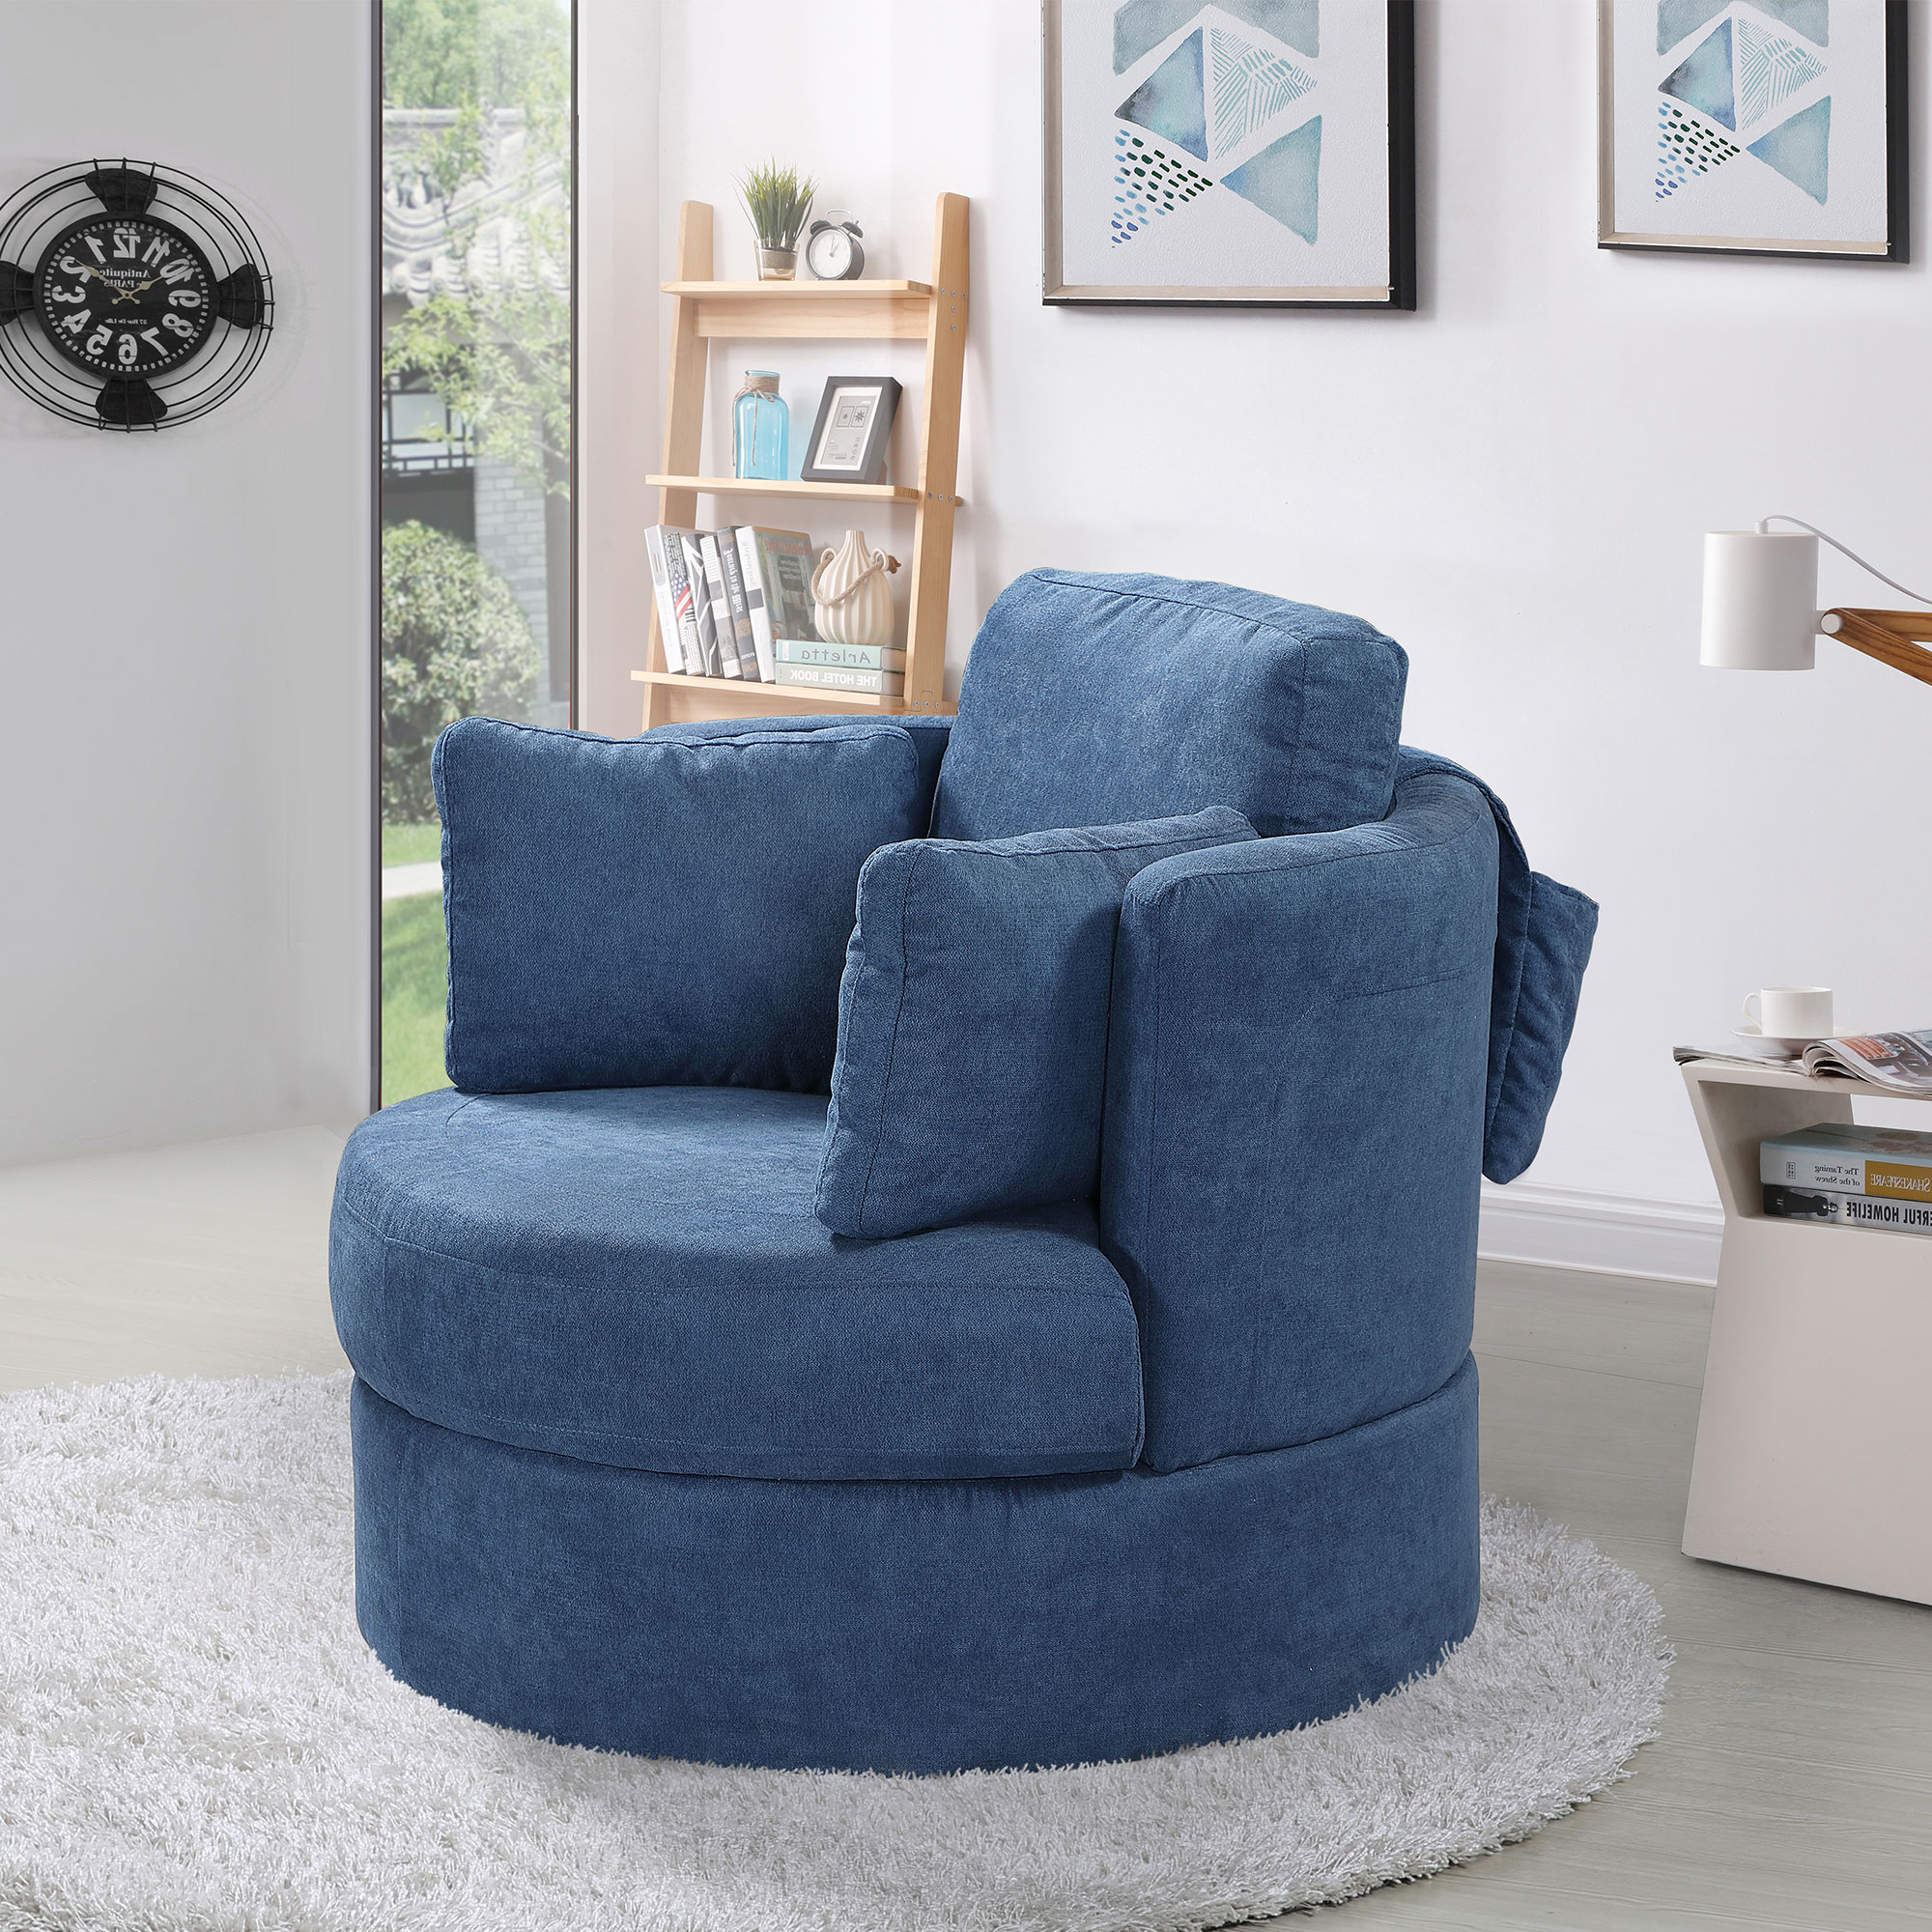 Welike Blue Swivel Accent Barrel Modern Sofa Lounge Club Round Chair Linen Fabric for Living Room Hotel with 3 Pillows and storage(the other SKU: BLUE7122)-Boyel Living